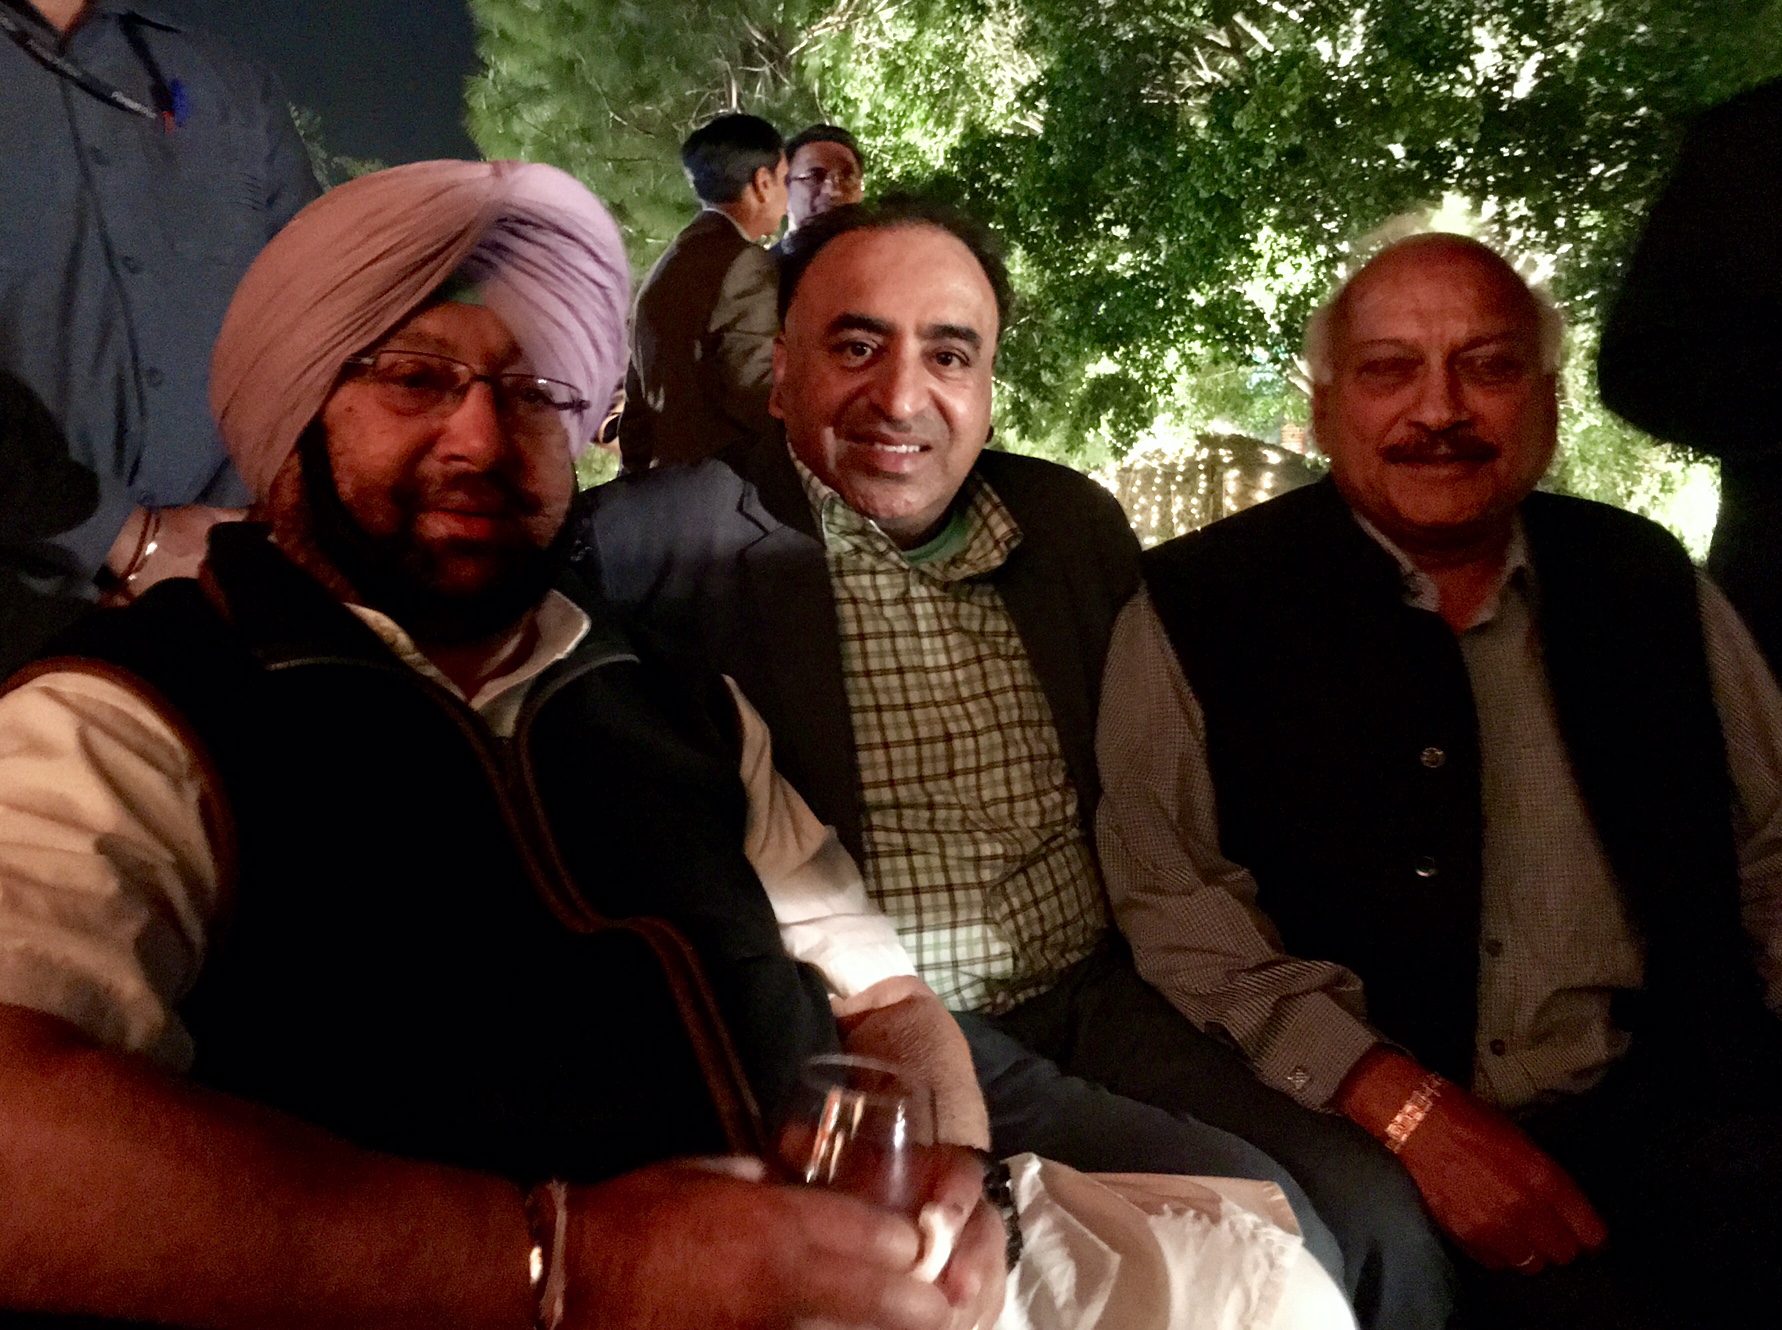 DESIBUZZCanada Founder R. Paul Dhillon Meets With Punjab Chief Minister Captain Amarinder Singh And Punjab’s Number #2 Man Brahm Mohindra